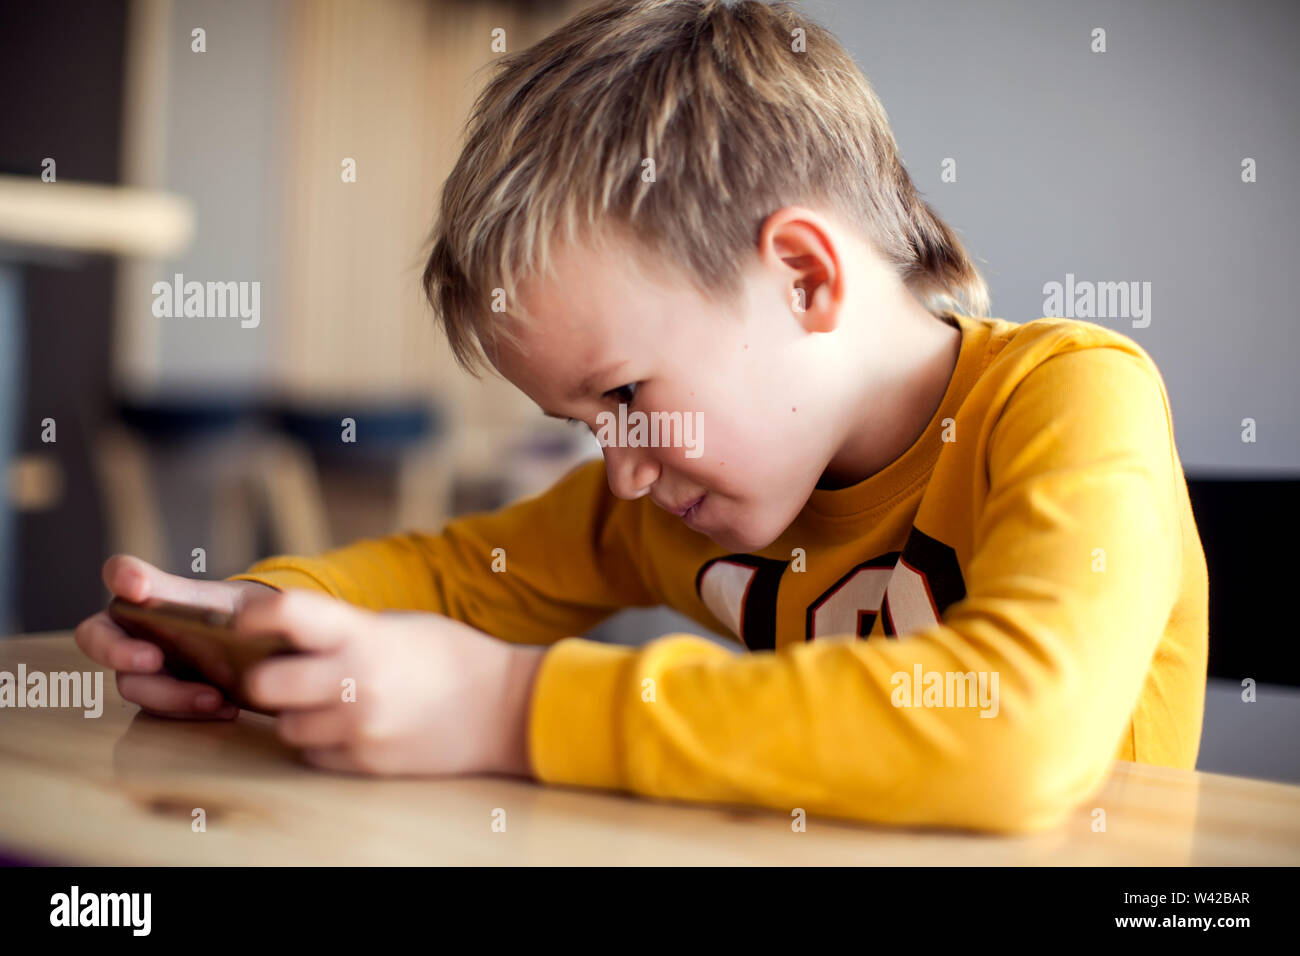 Children, technology and internet concept. Little smiling child boy playing games or surfing internet on digital smartphone Stock Photo